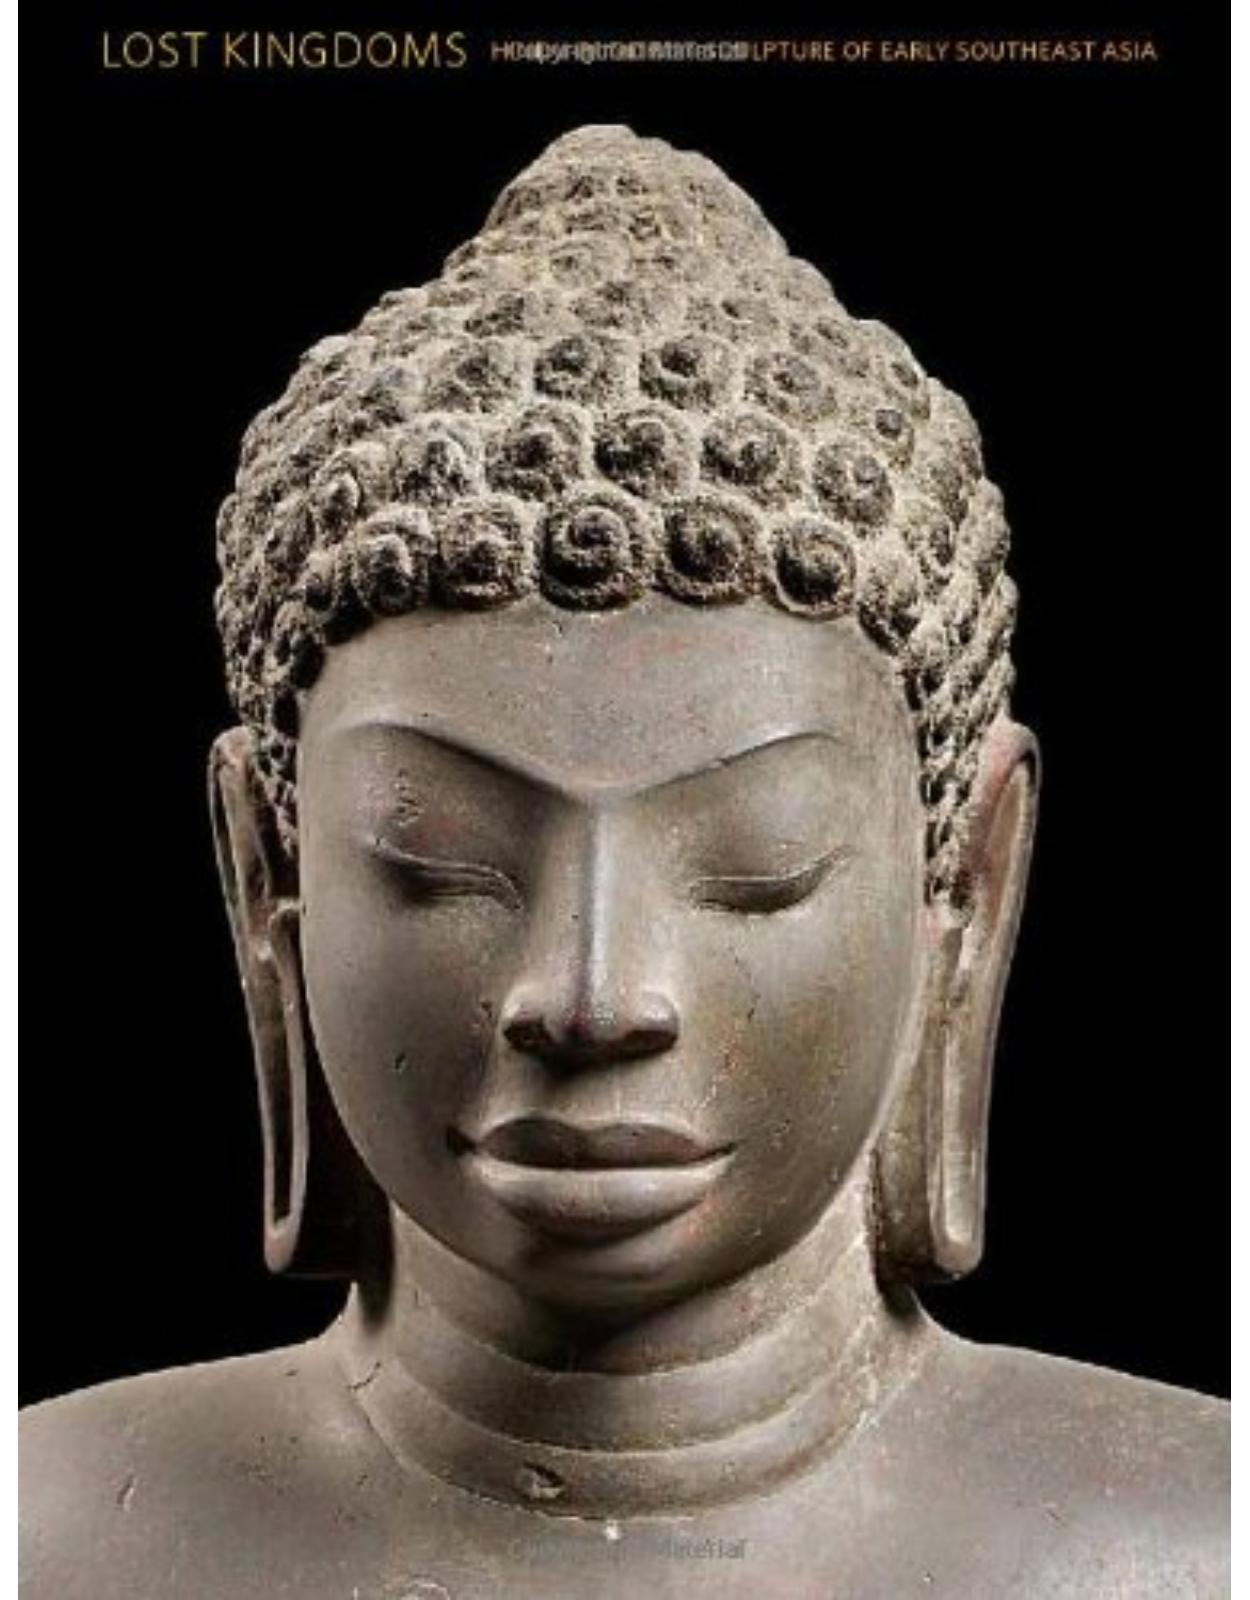 Lost Kingdoms. Hindu-Buddhist Sculpture of Early Southeast Asia